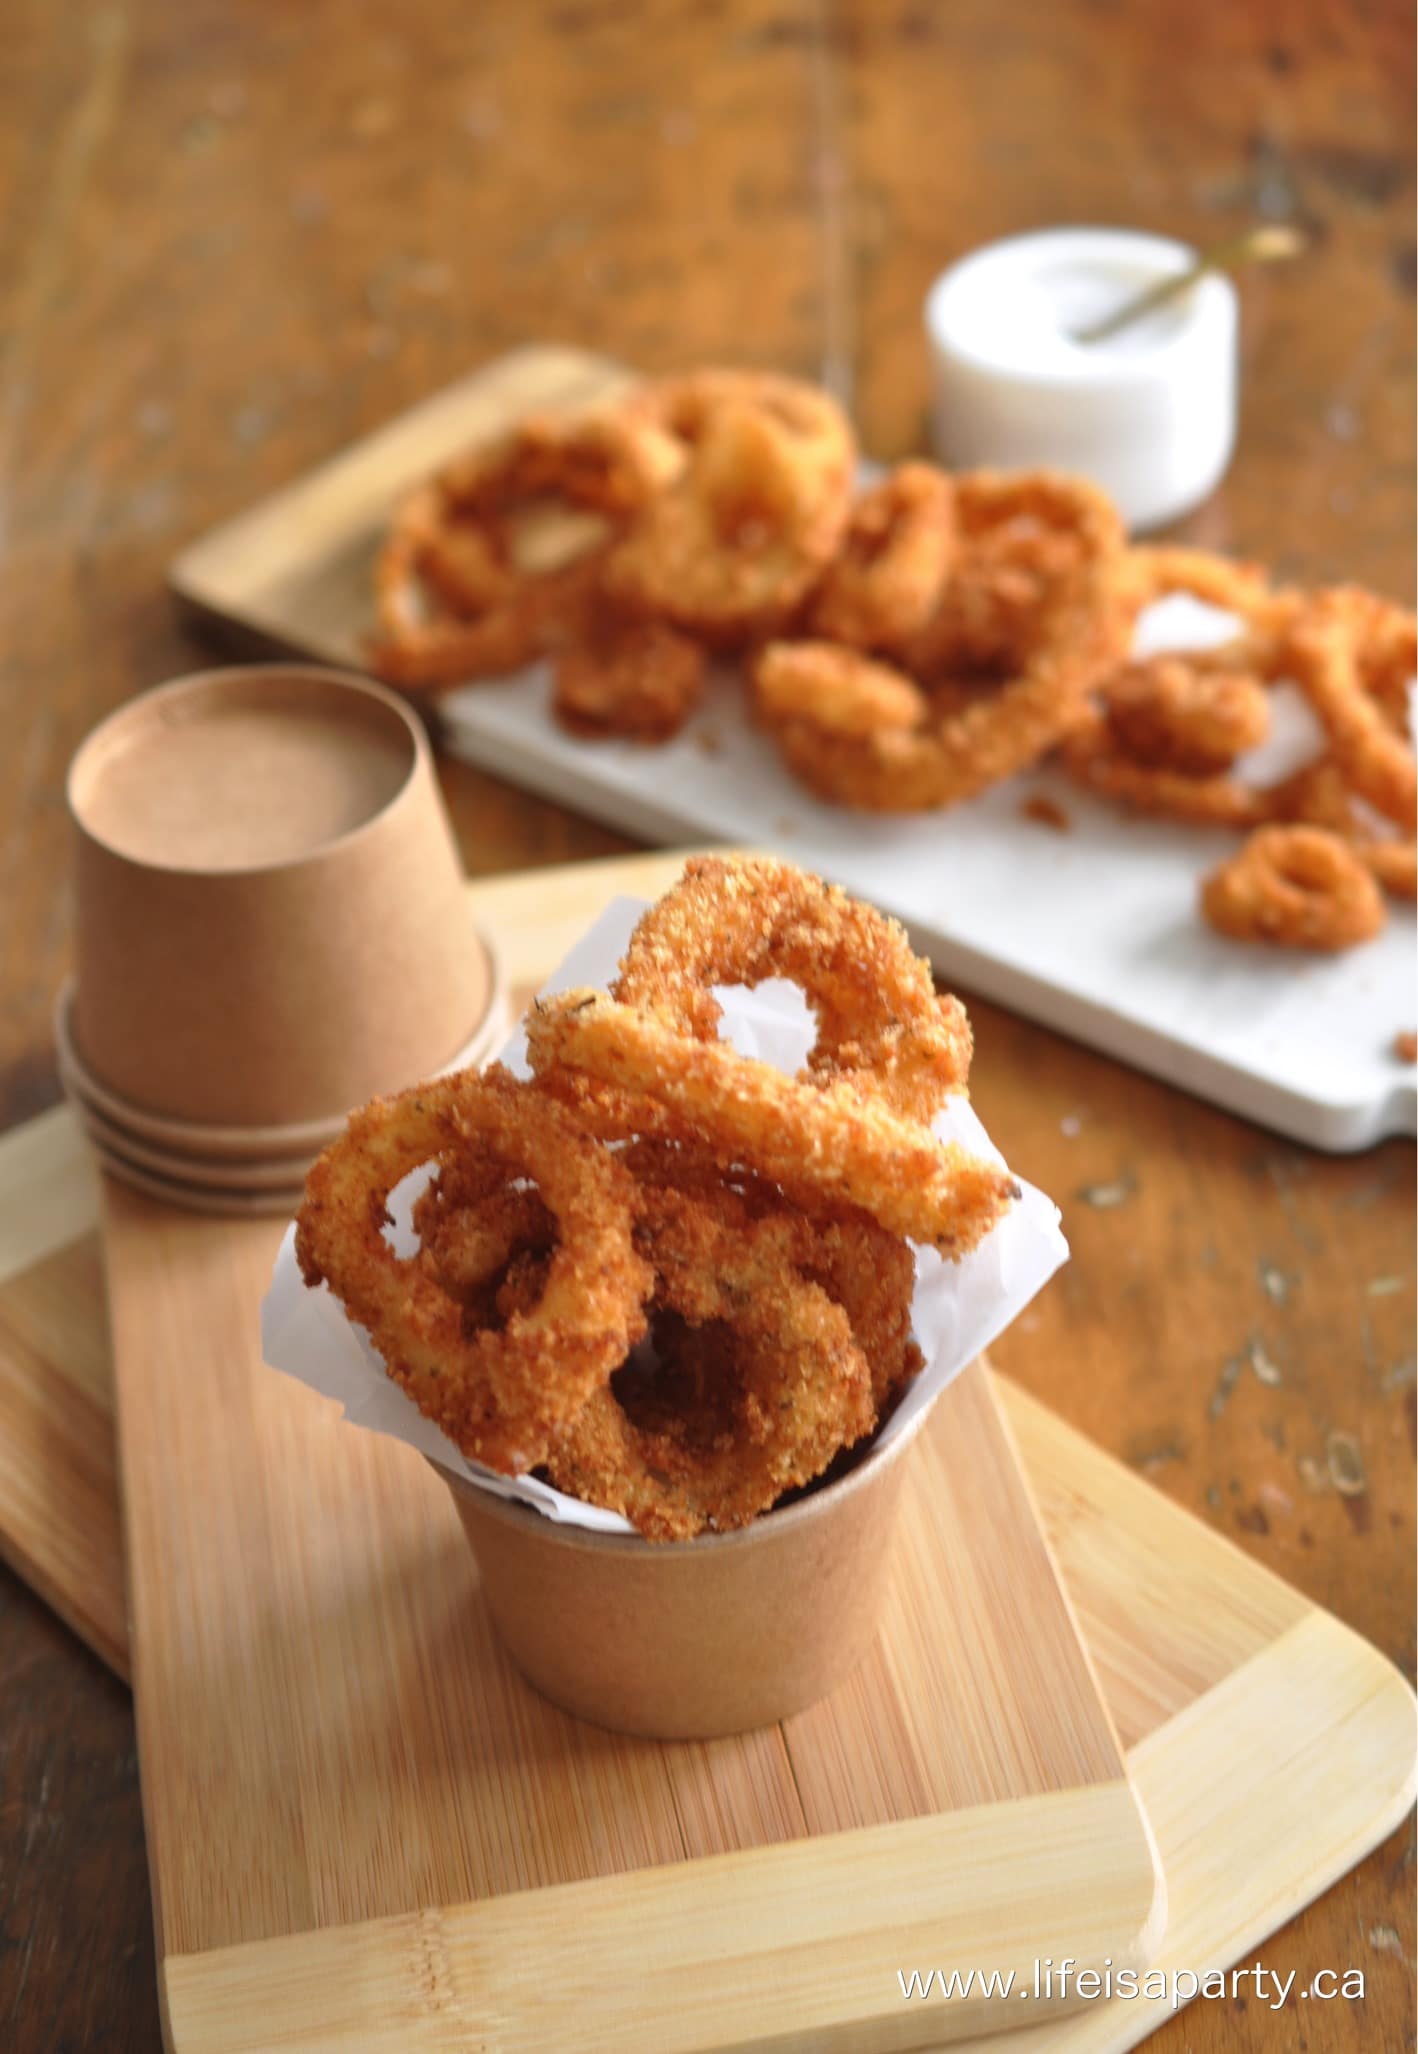 Homemade Onion Rings: great recipe to make homemade breaded onion rings, guaranteed to wow!